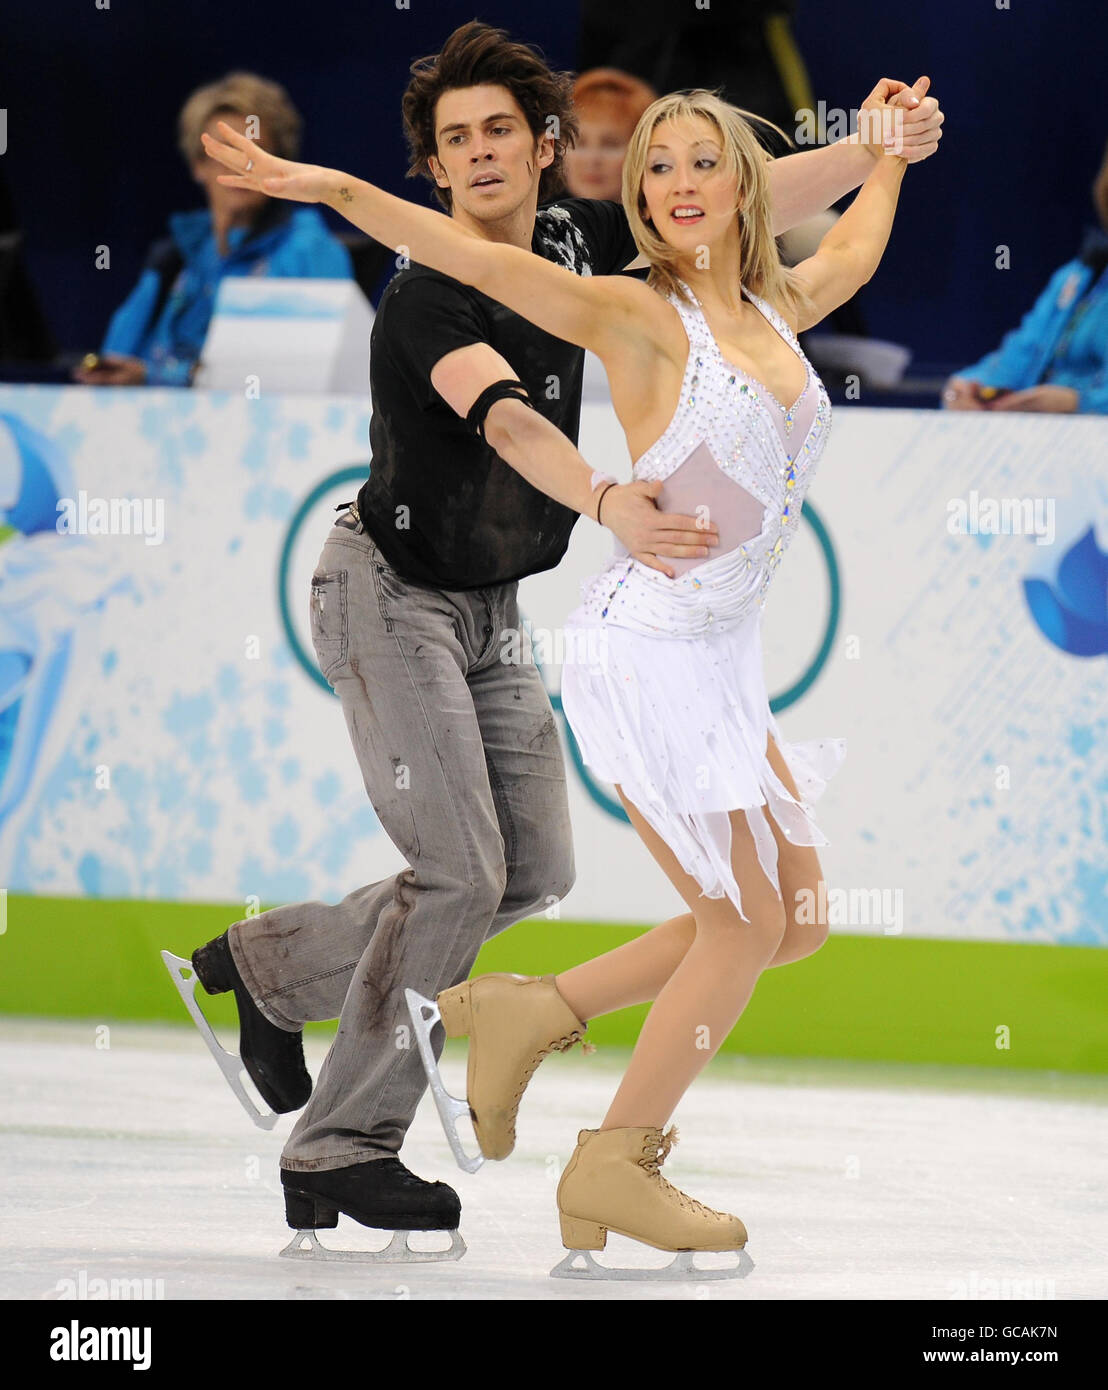 Great Britain's Sinead and John Kerr in action during their Free Dance in the Figure Skating Ice Dance during the 2010 Winter Olympics at the Pacific Coliseum, Vancouver, Canada. Stock Photo